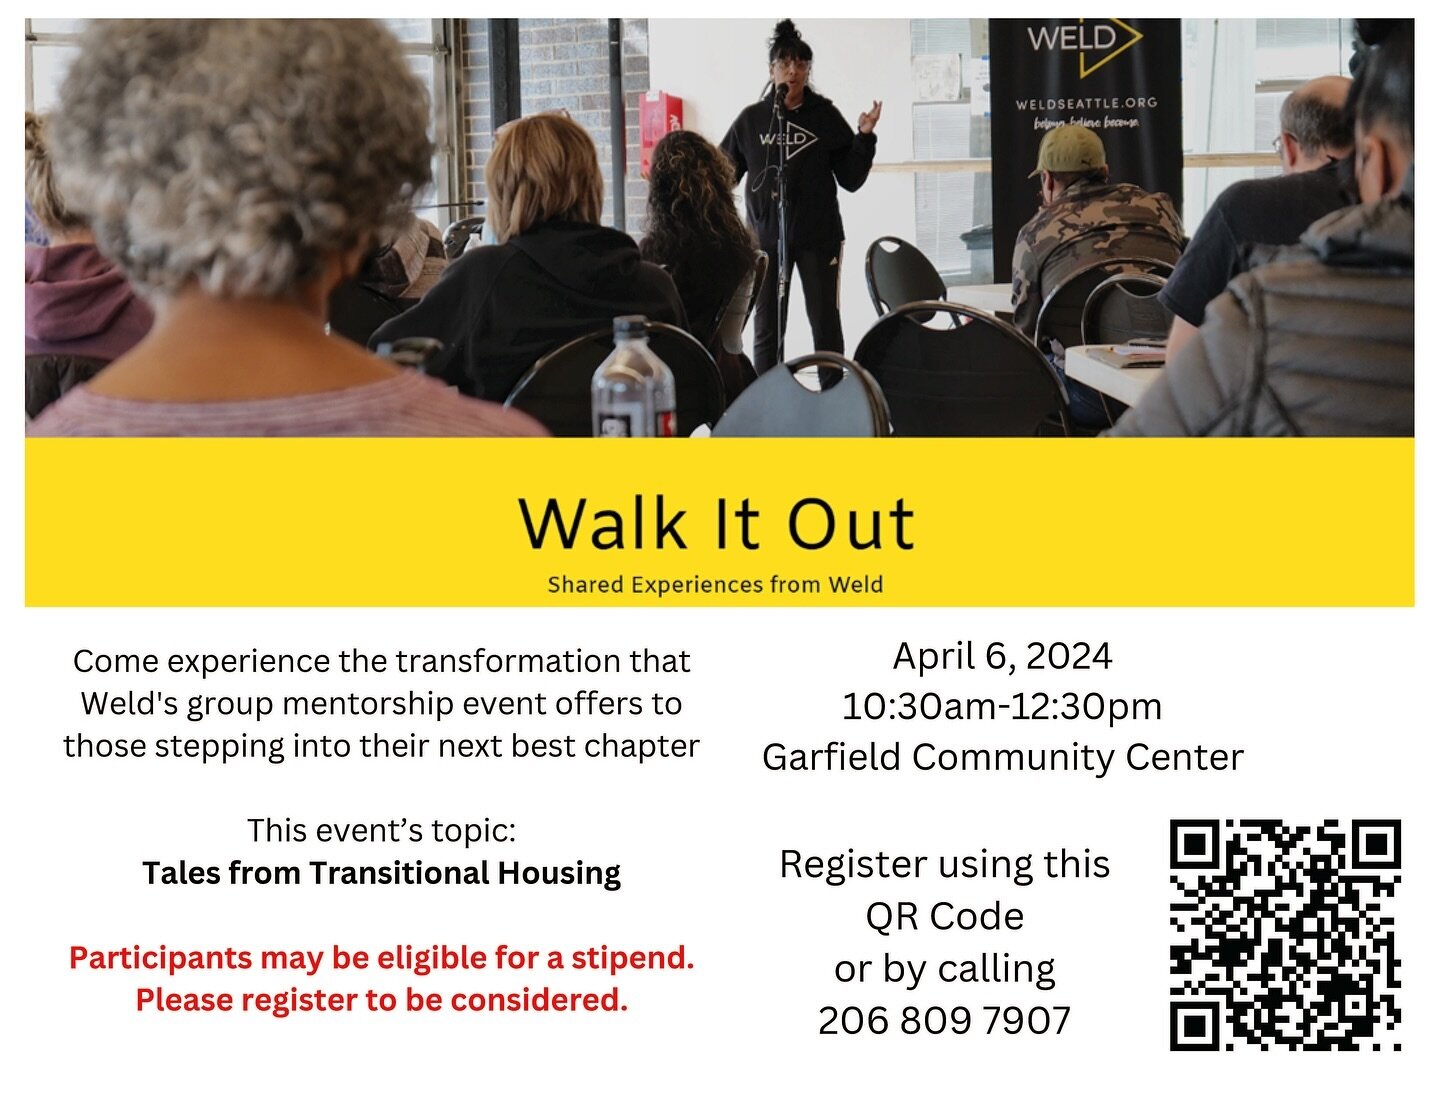 Come experience the transformation that Weld&rsquo;s group mentorship event offers to those stepping into their next best chapter. &nbsp;Engaging speakers sharing their stories combined with community-building opportunities to engage with others walk